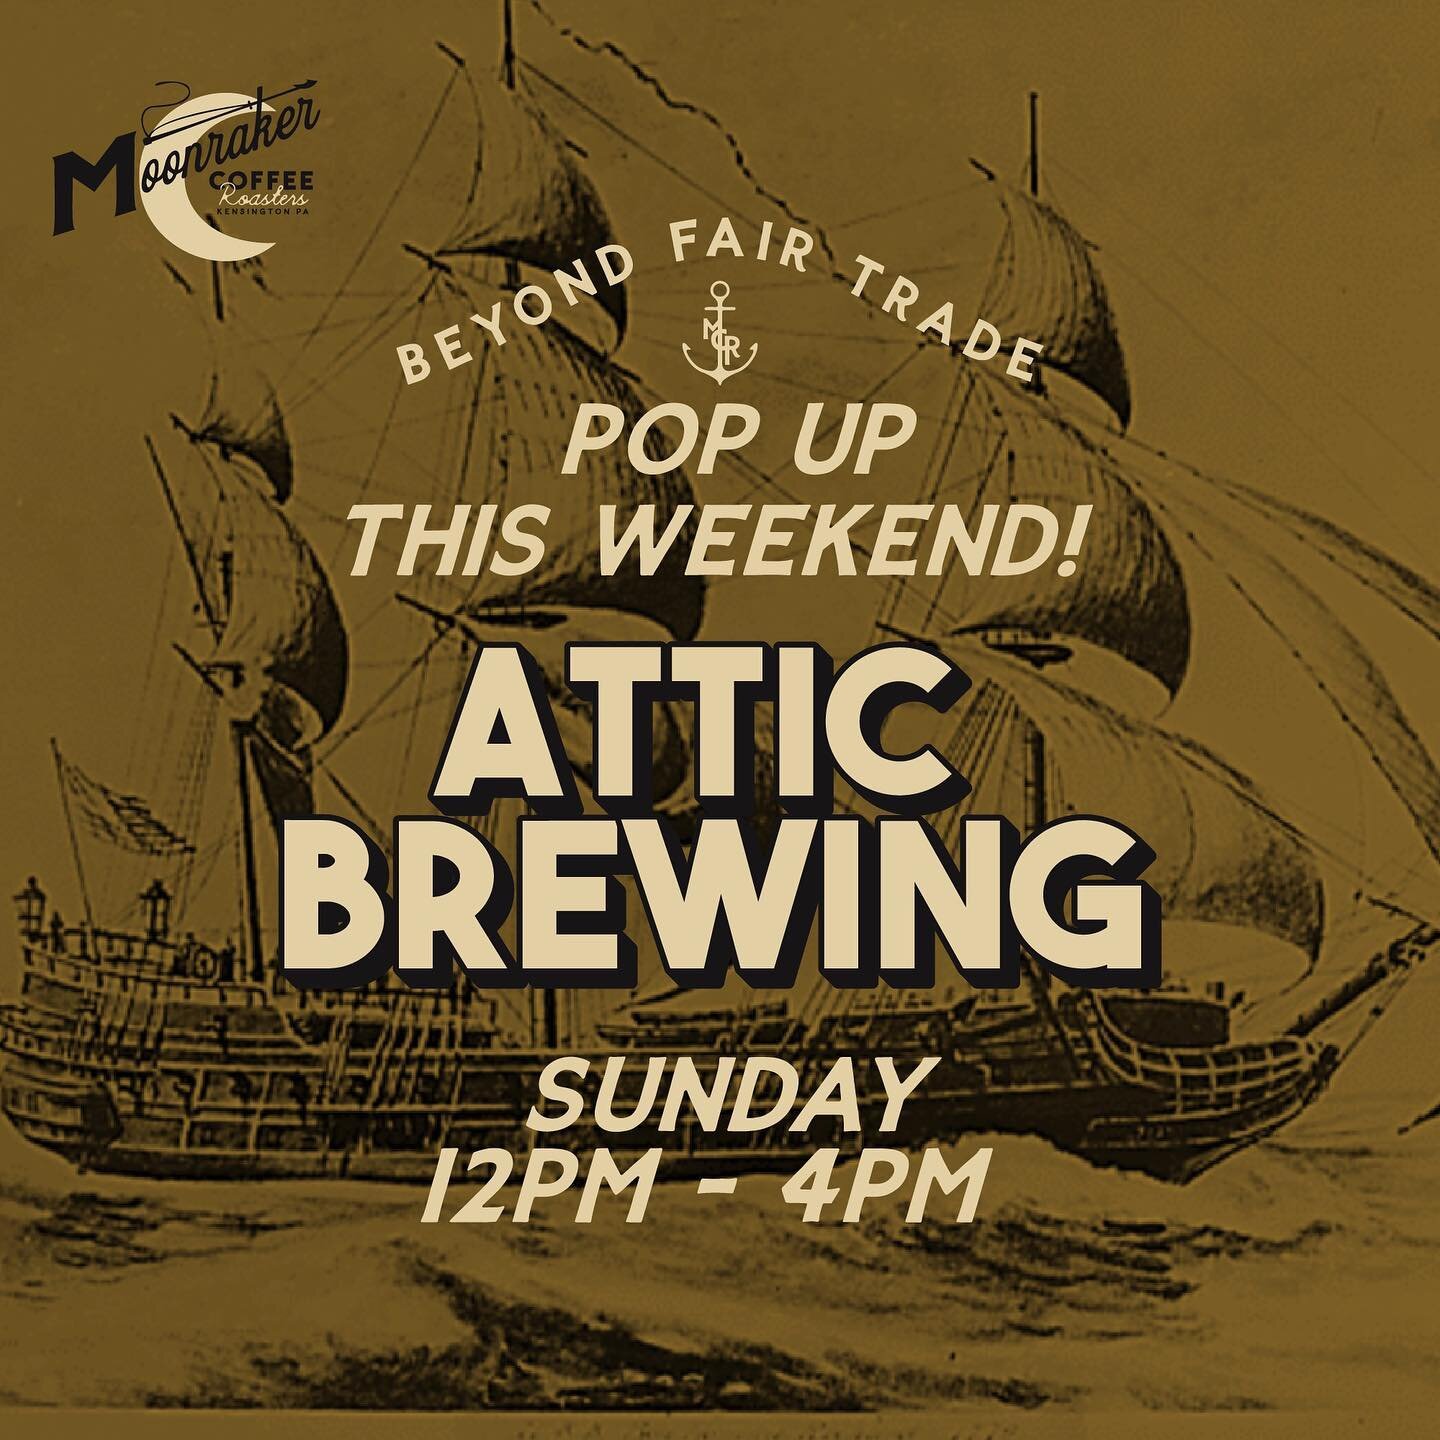 Running it back @atticbrewing tomorrow!  Stop on by for some fresh air in Germantown! Awesome atmosphere with Cold Beer, Hot Coffee, Food Trucks and Live Music. Sunday 12-4